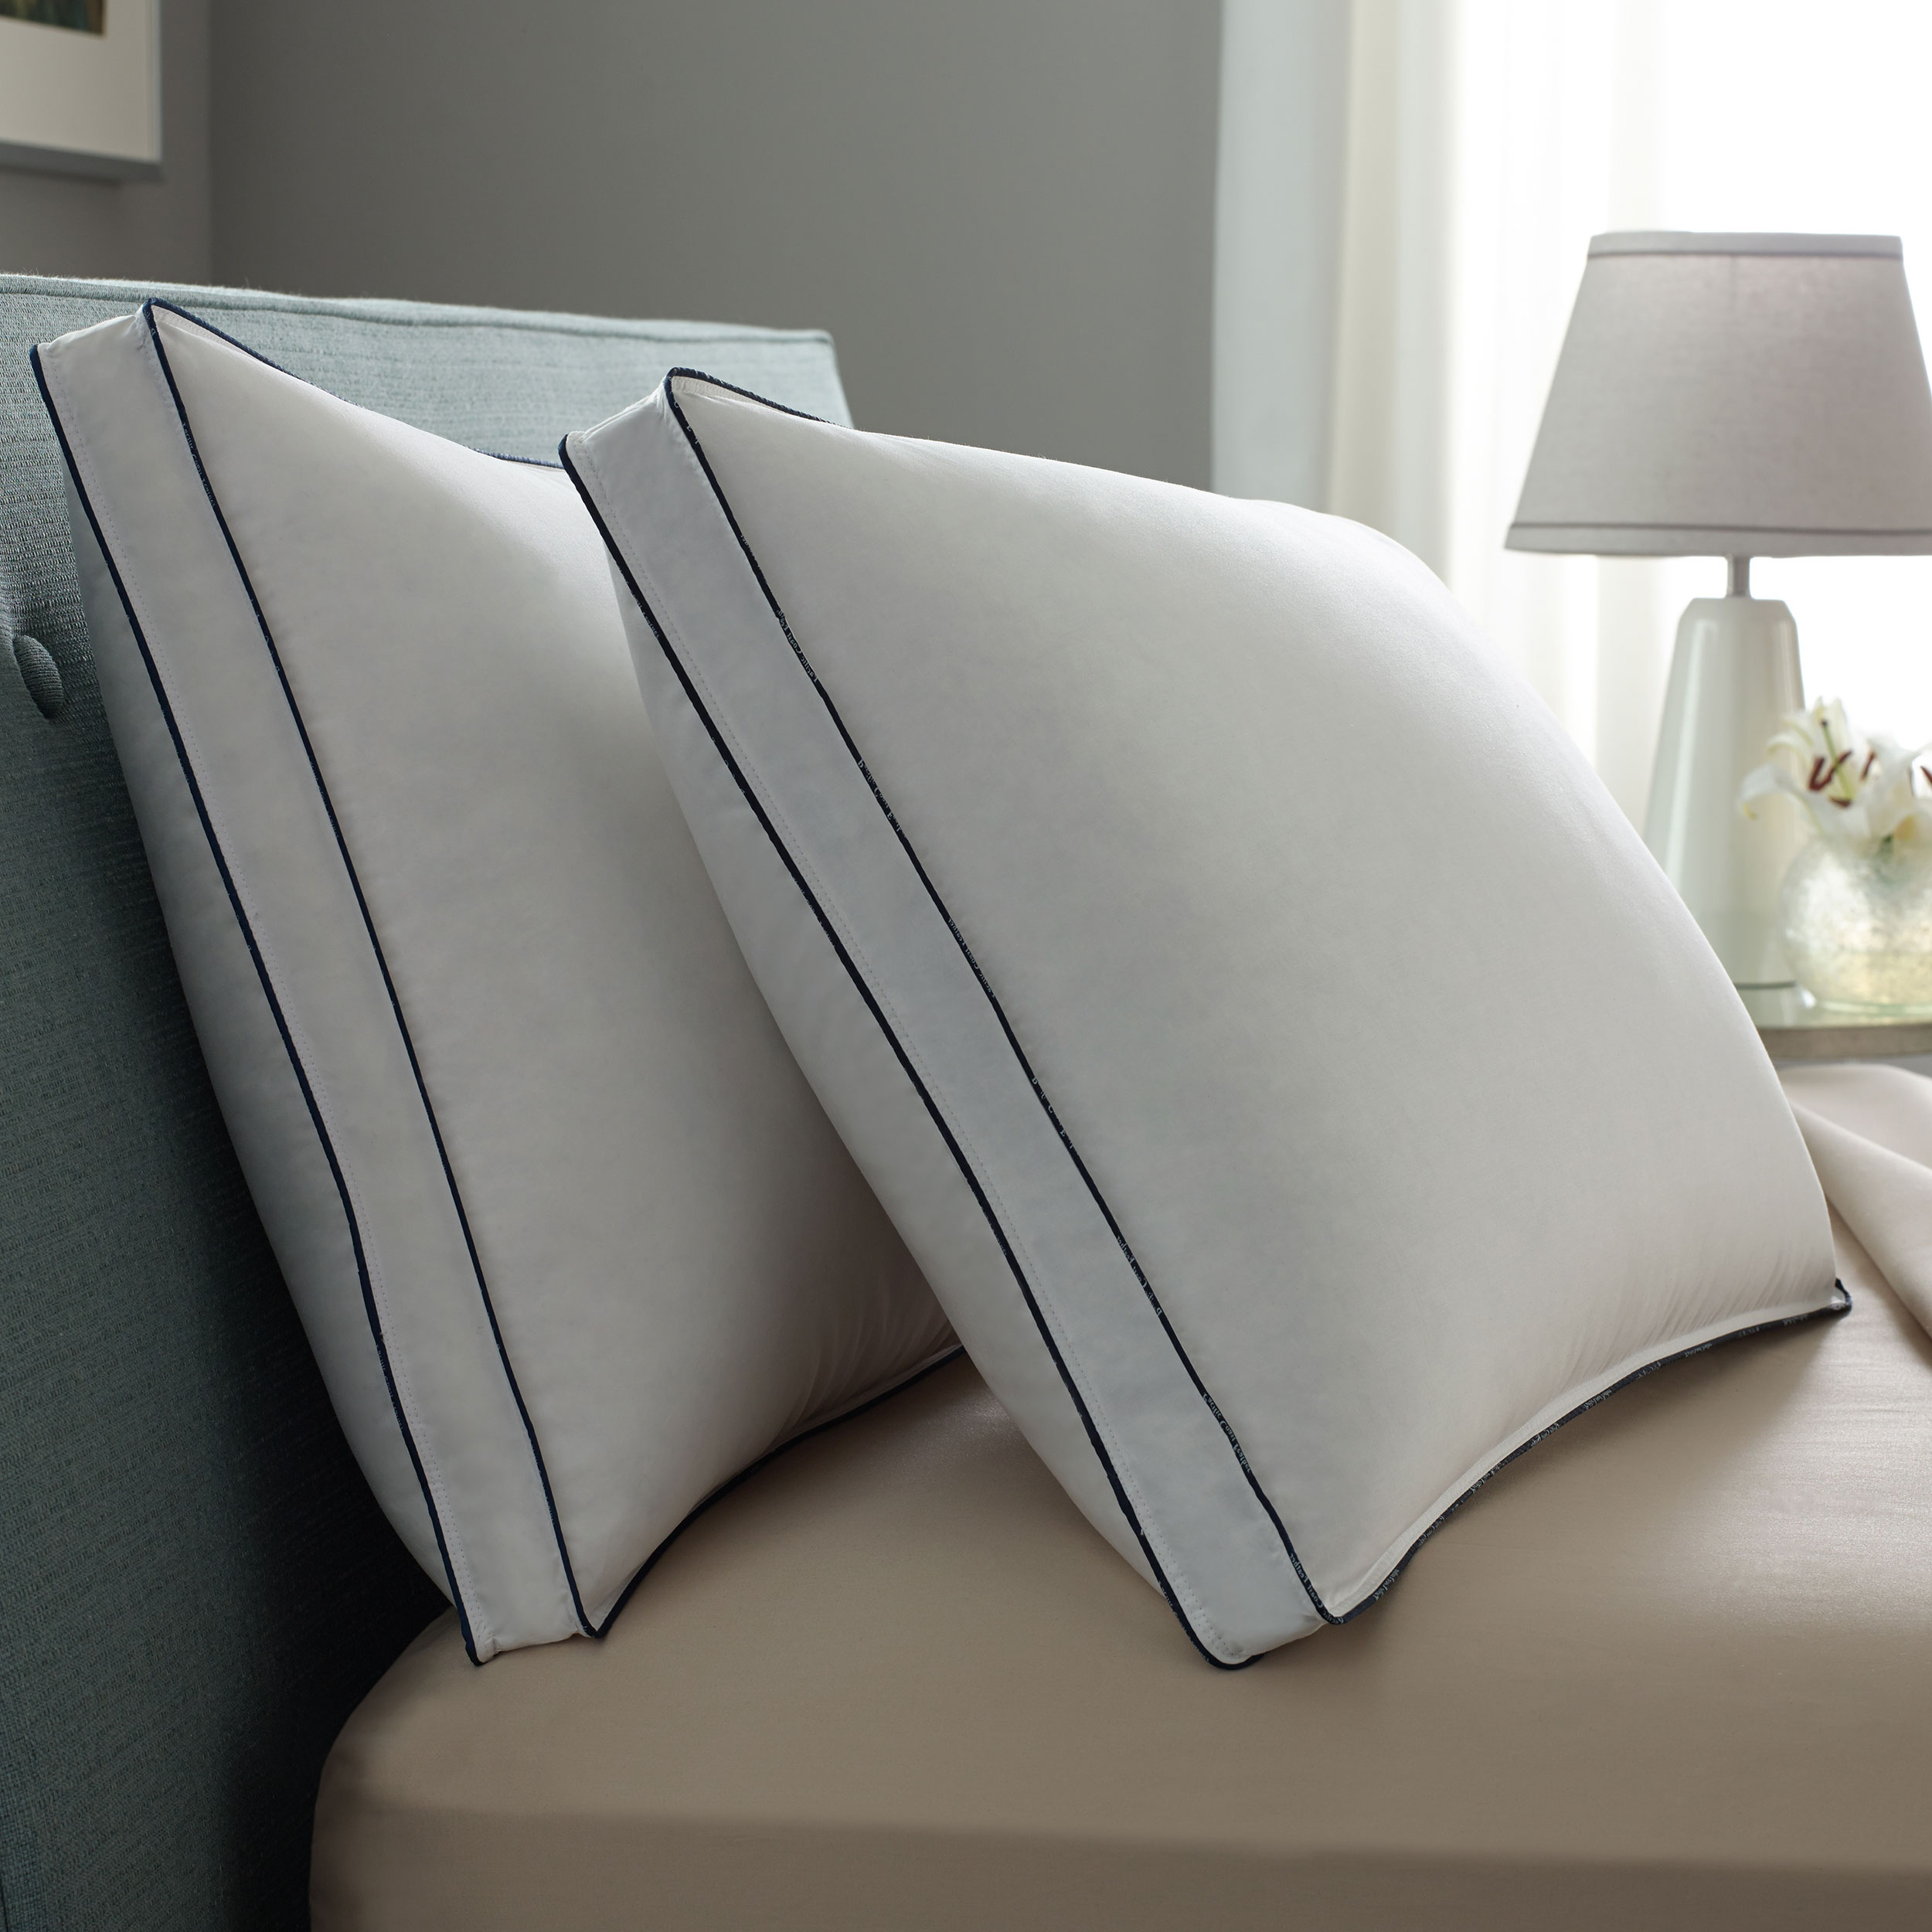 Pacific Coast Double Downaround Medium 2 Pack Pillow 300 Thread Count 550 Fill Power Down & Resilia Feathers - King